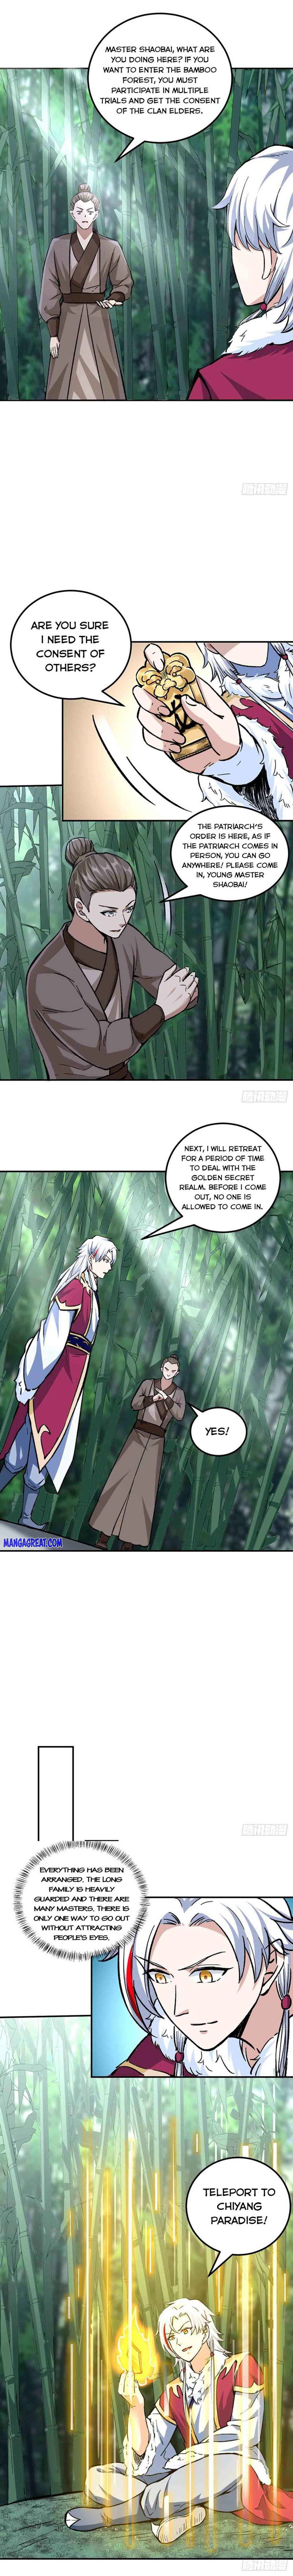 Martial Arts Reigns Chapter 336 page 5